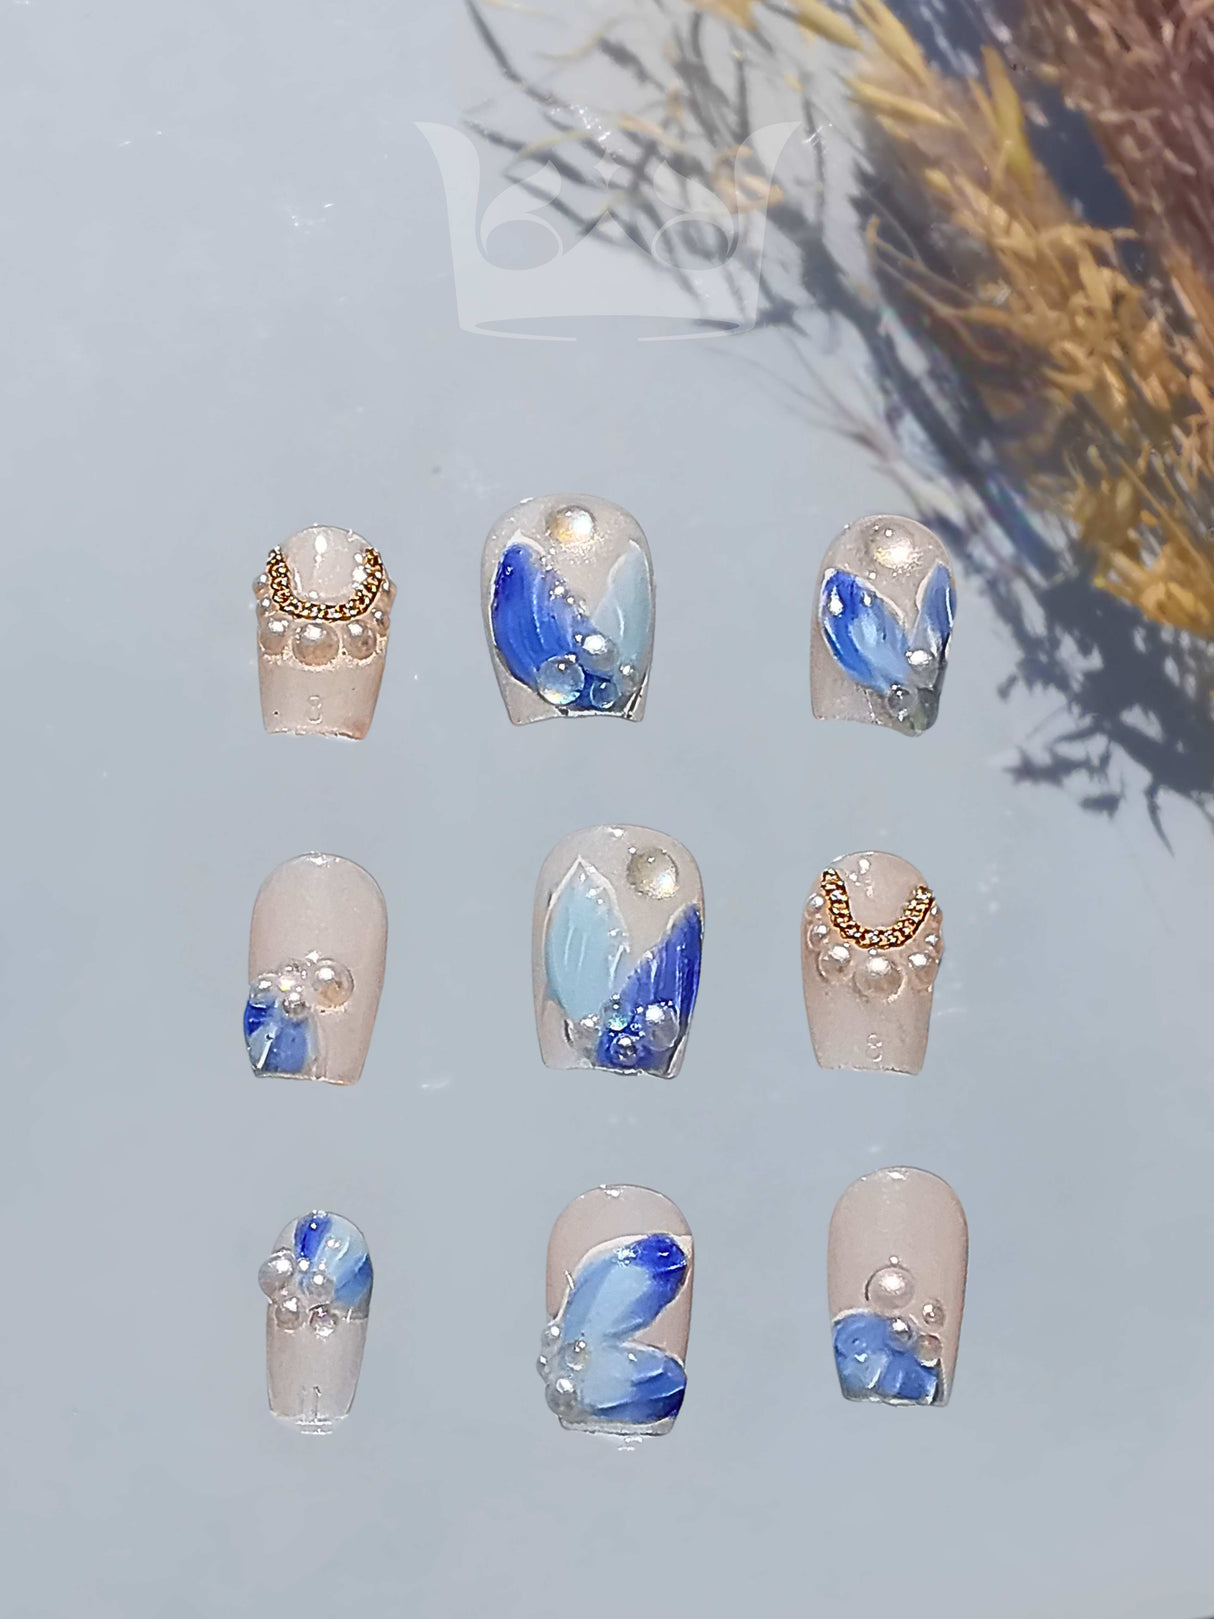 Sophisticated nails with a soft, neutral base color and blue floral accents, rhinestones, and embellishments. Glossy finish, moderate length, and varied designs. 